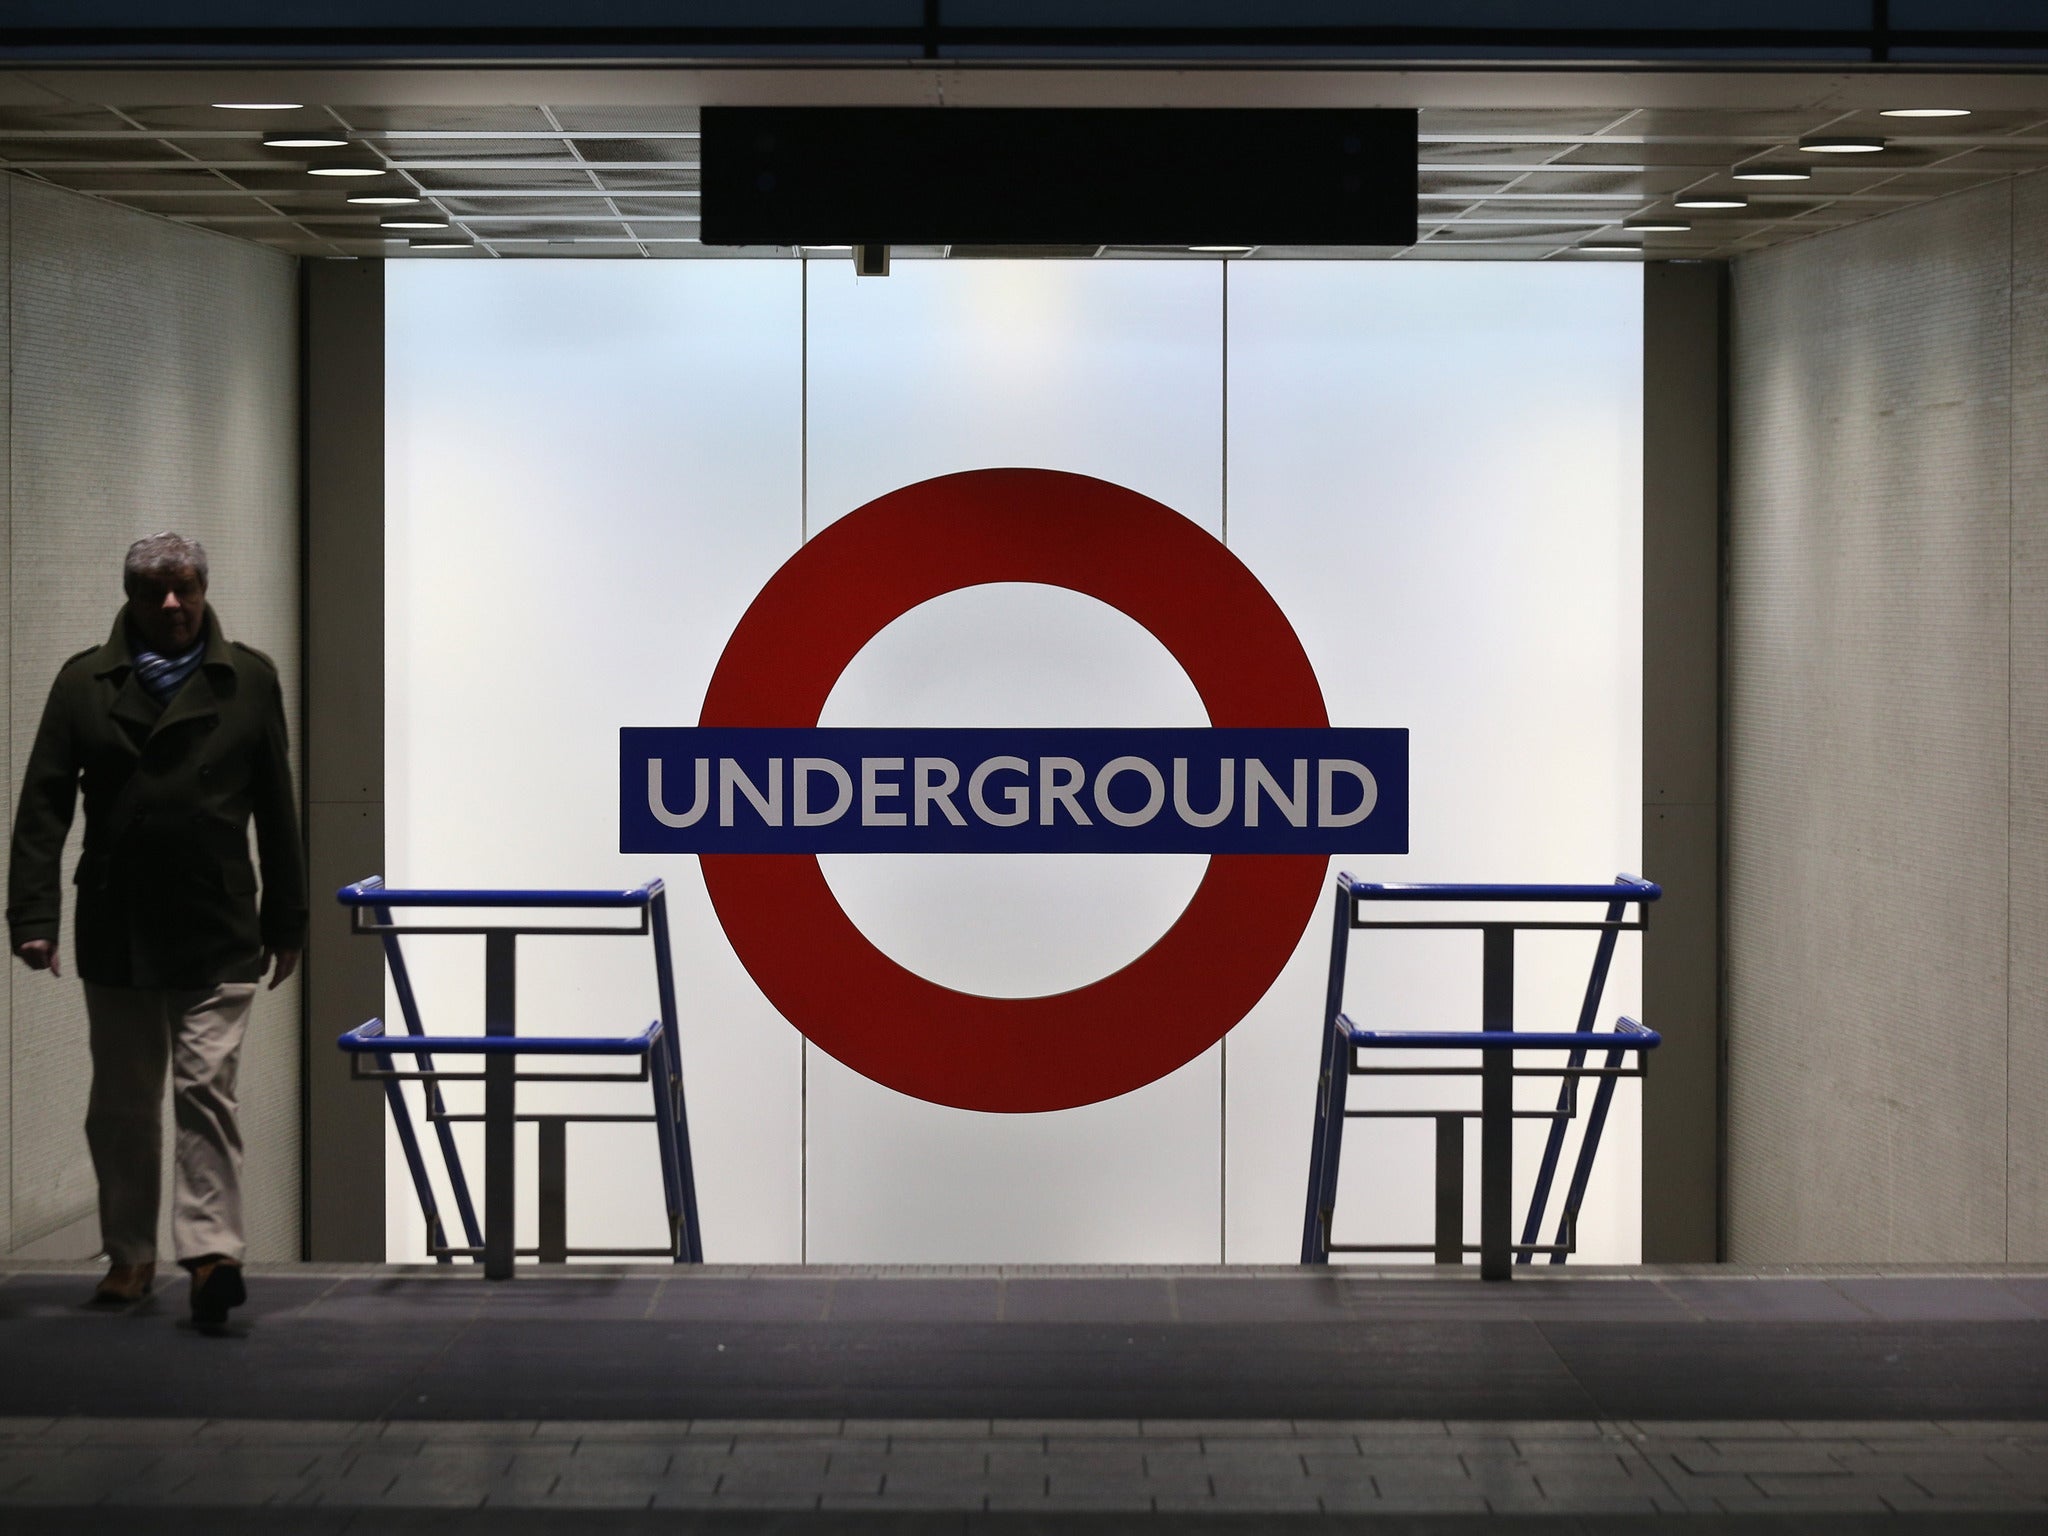 A new book alleges police 'covered up' claims a man had pushed 18 people onto the tracks of the London Underground